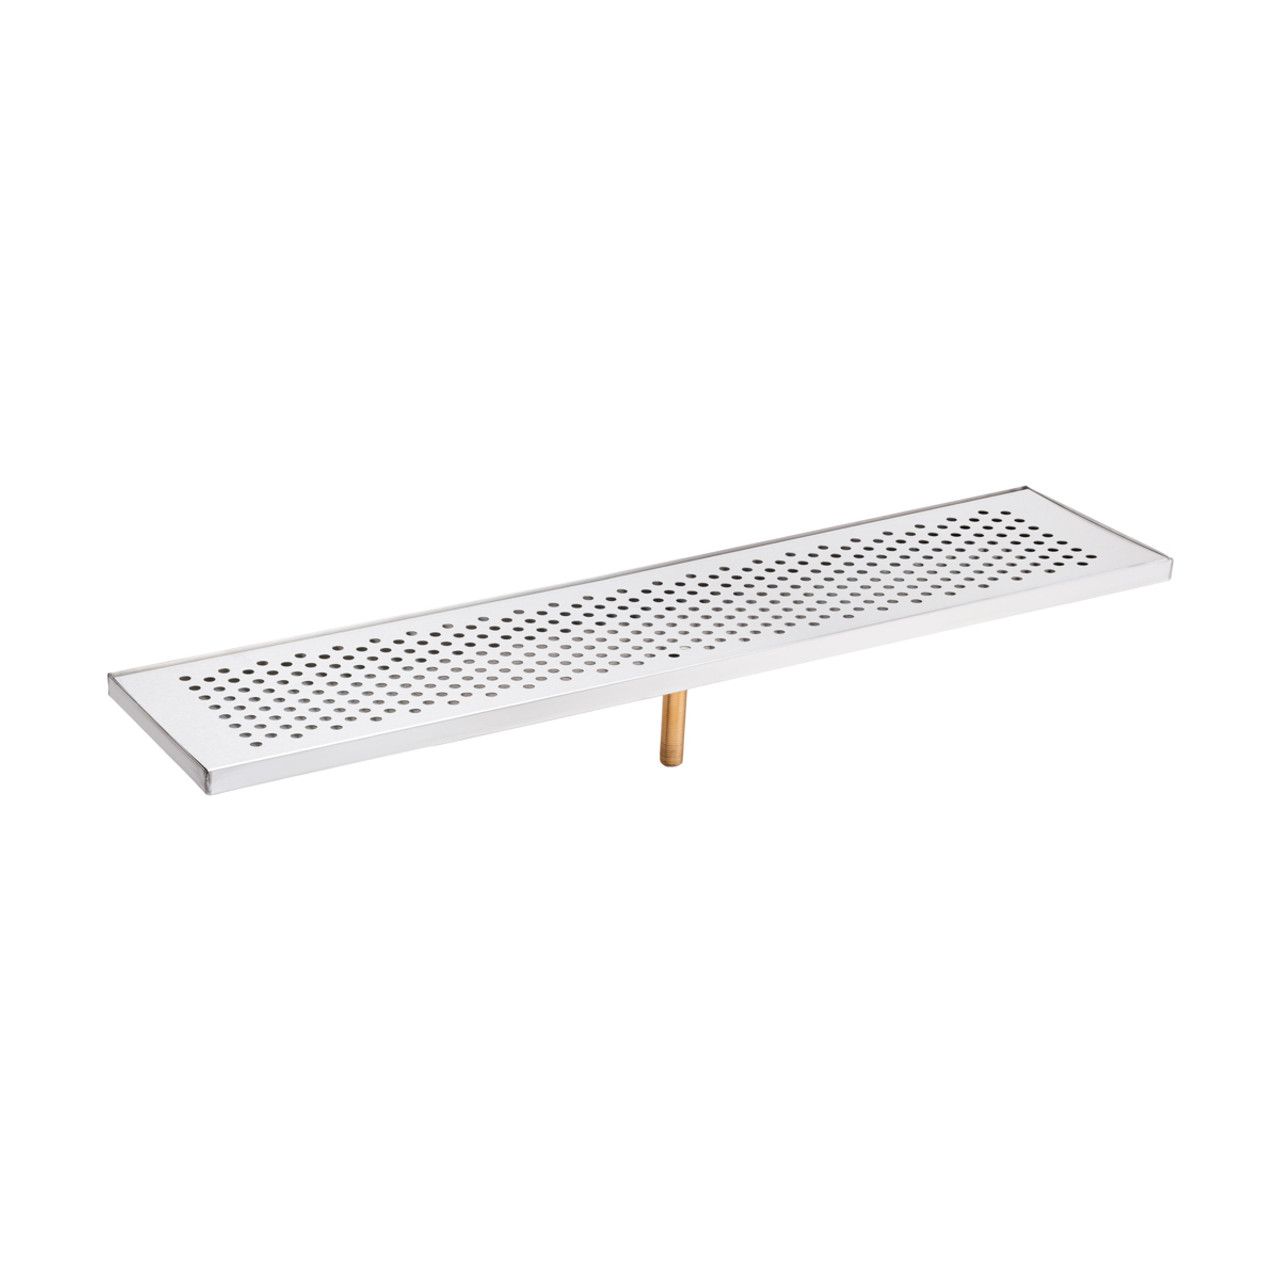 Perforated Drip Tray for Scupper Drink Rail